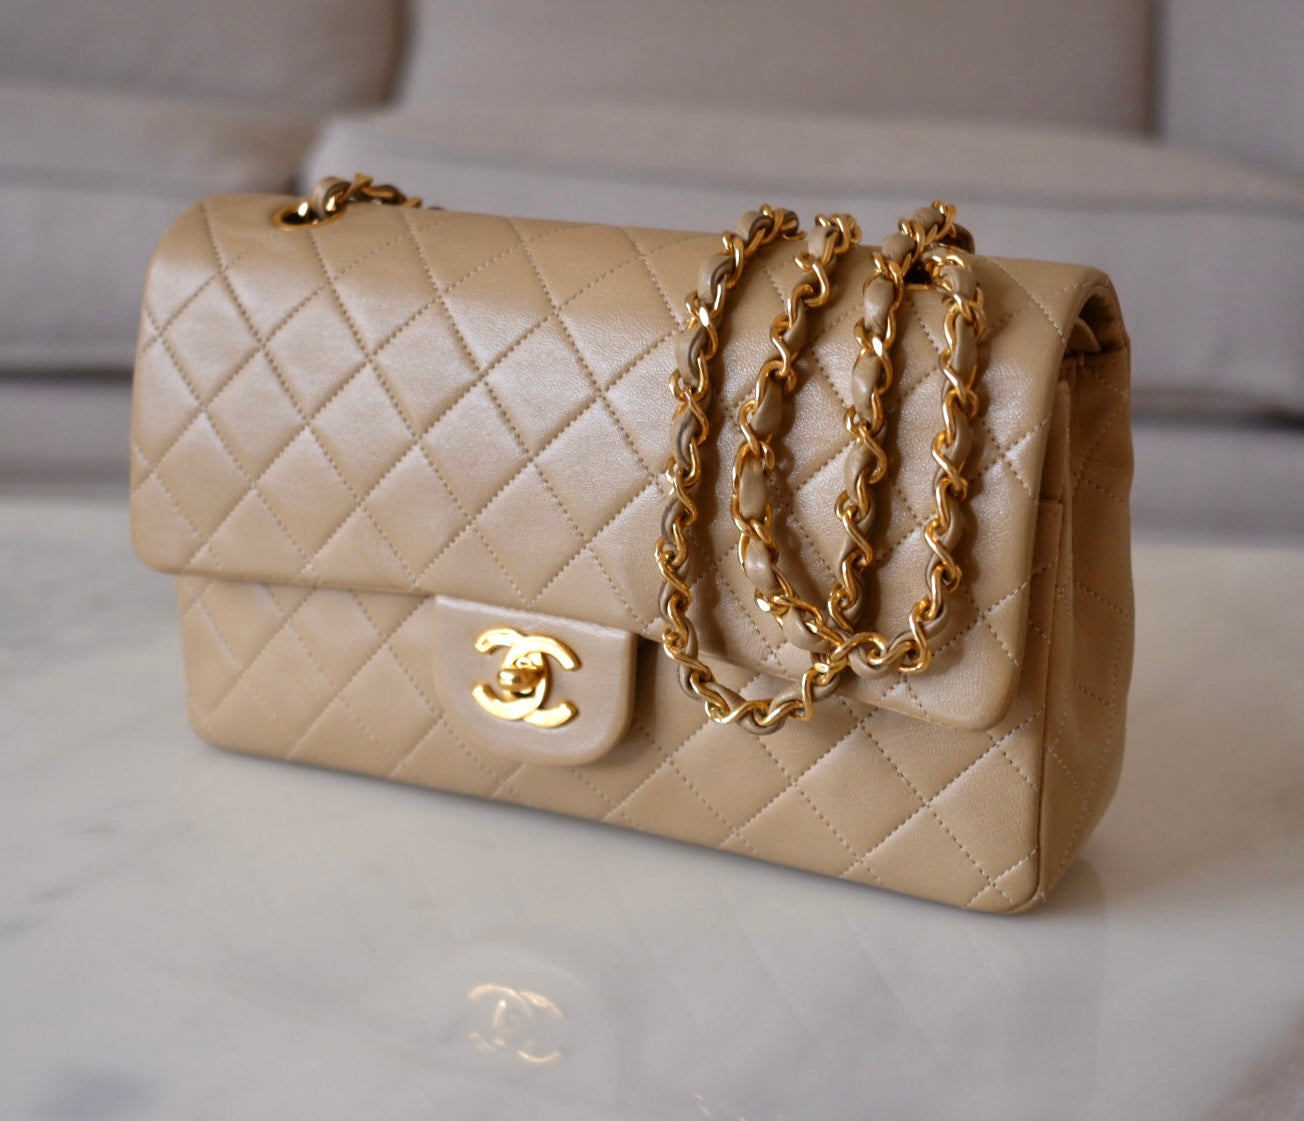 CHANEL, Bags, Chanel Square Mini Lambskin Classic Flap In Beige Ivory  Authentic